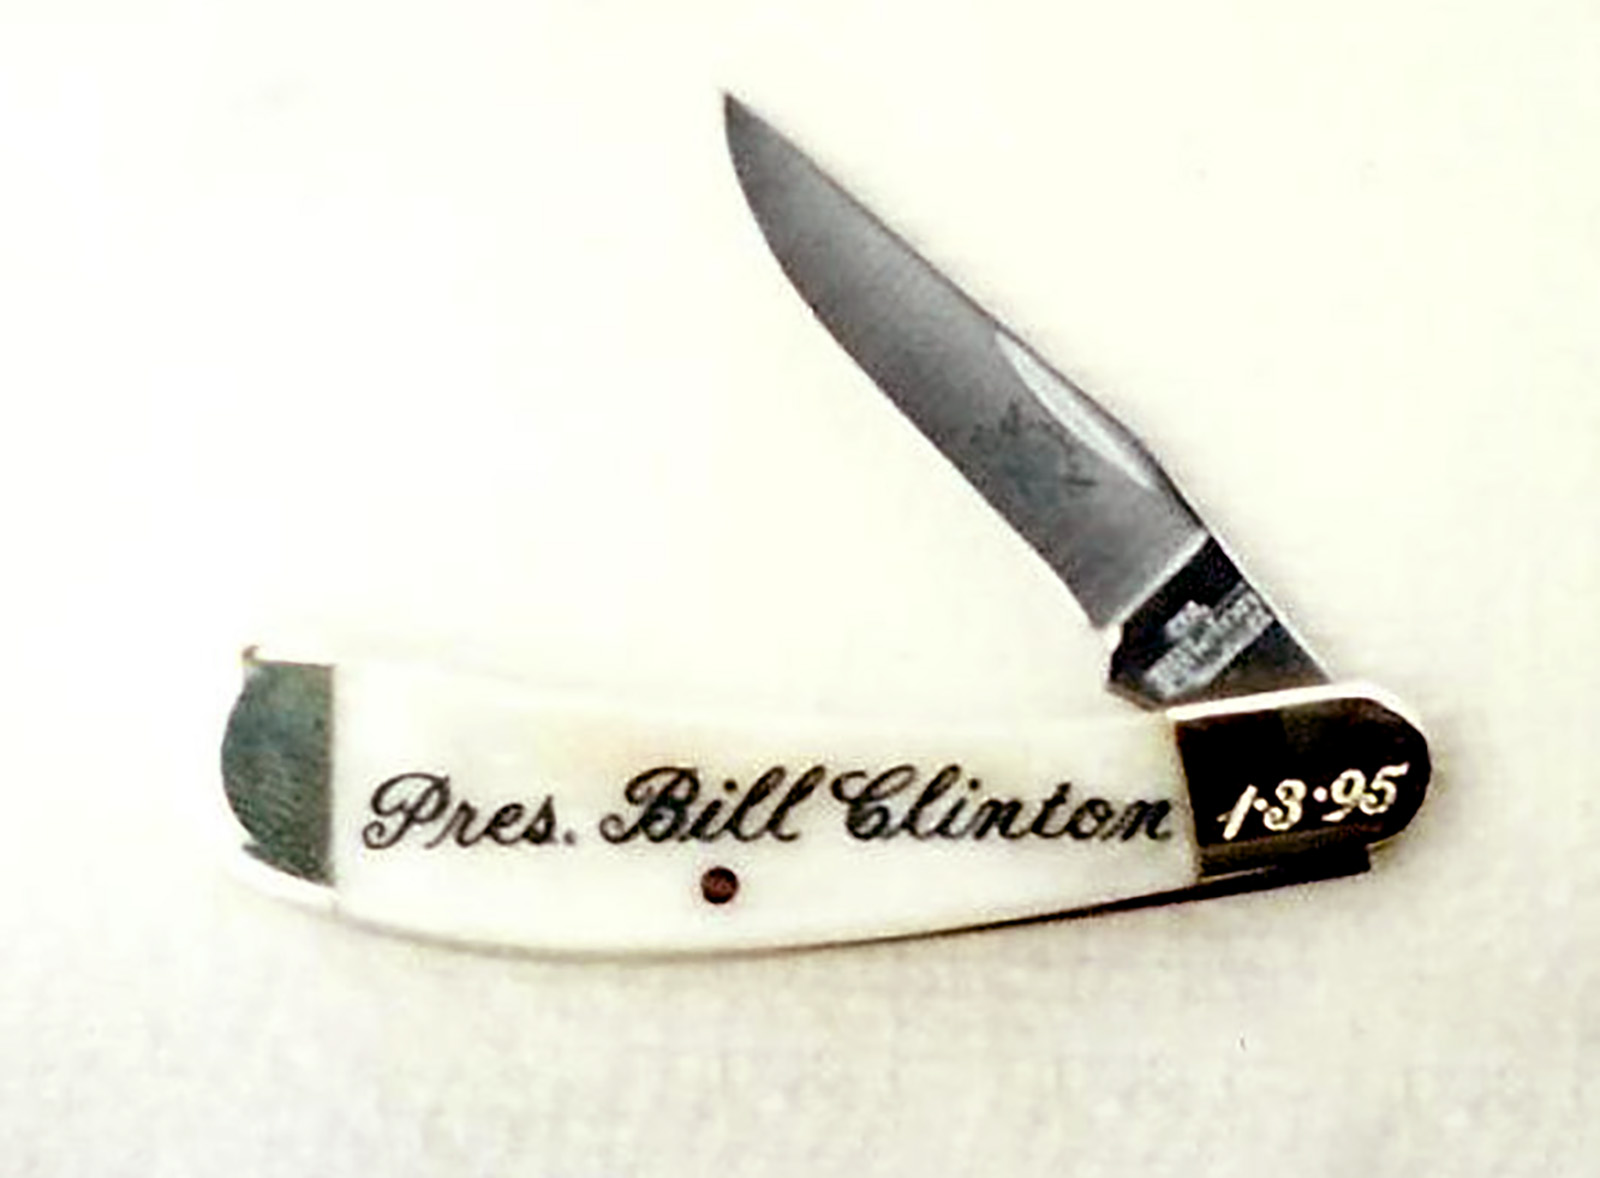 White bone handled Colonel Littleton knife with nickel bolsters, engraved with Pres. Bill Clinton and the date 1-3-95